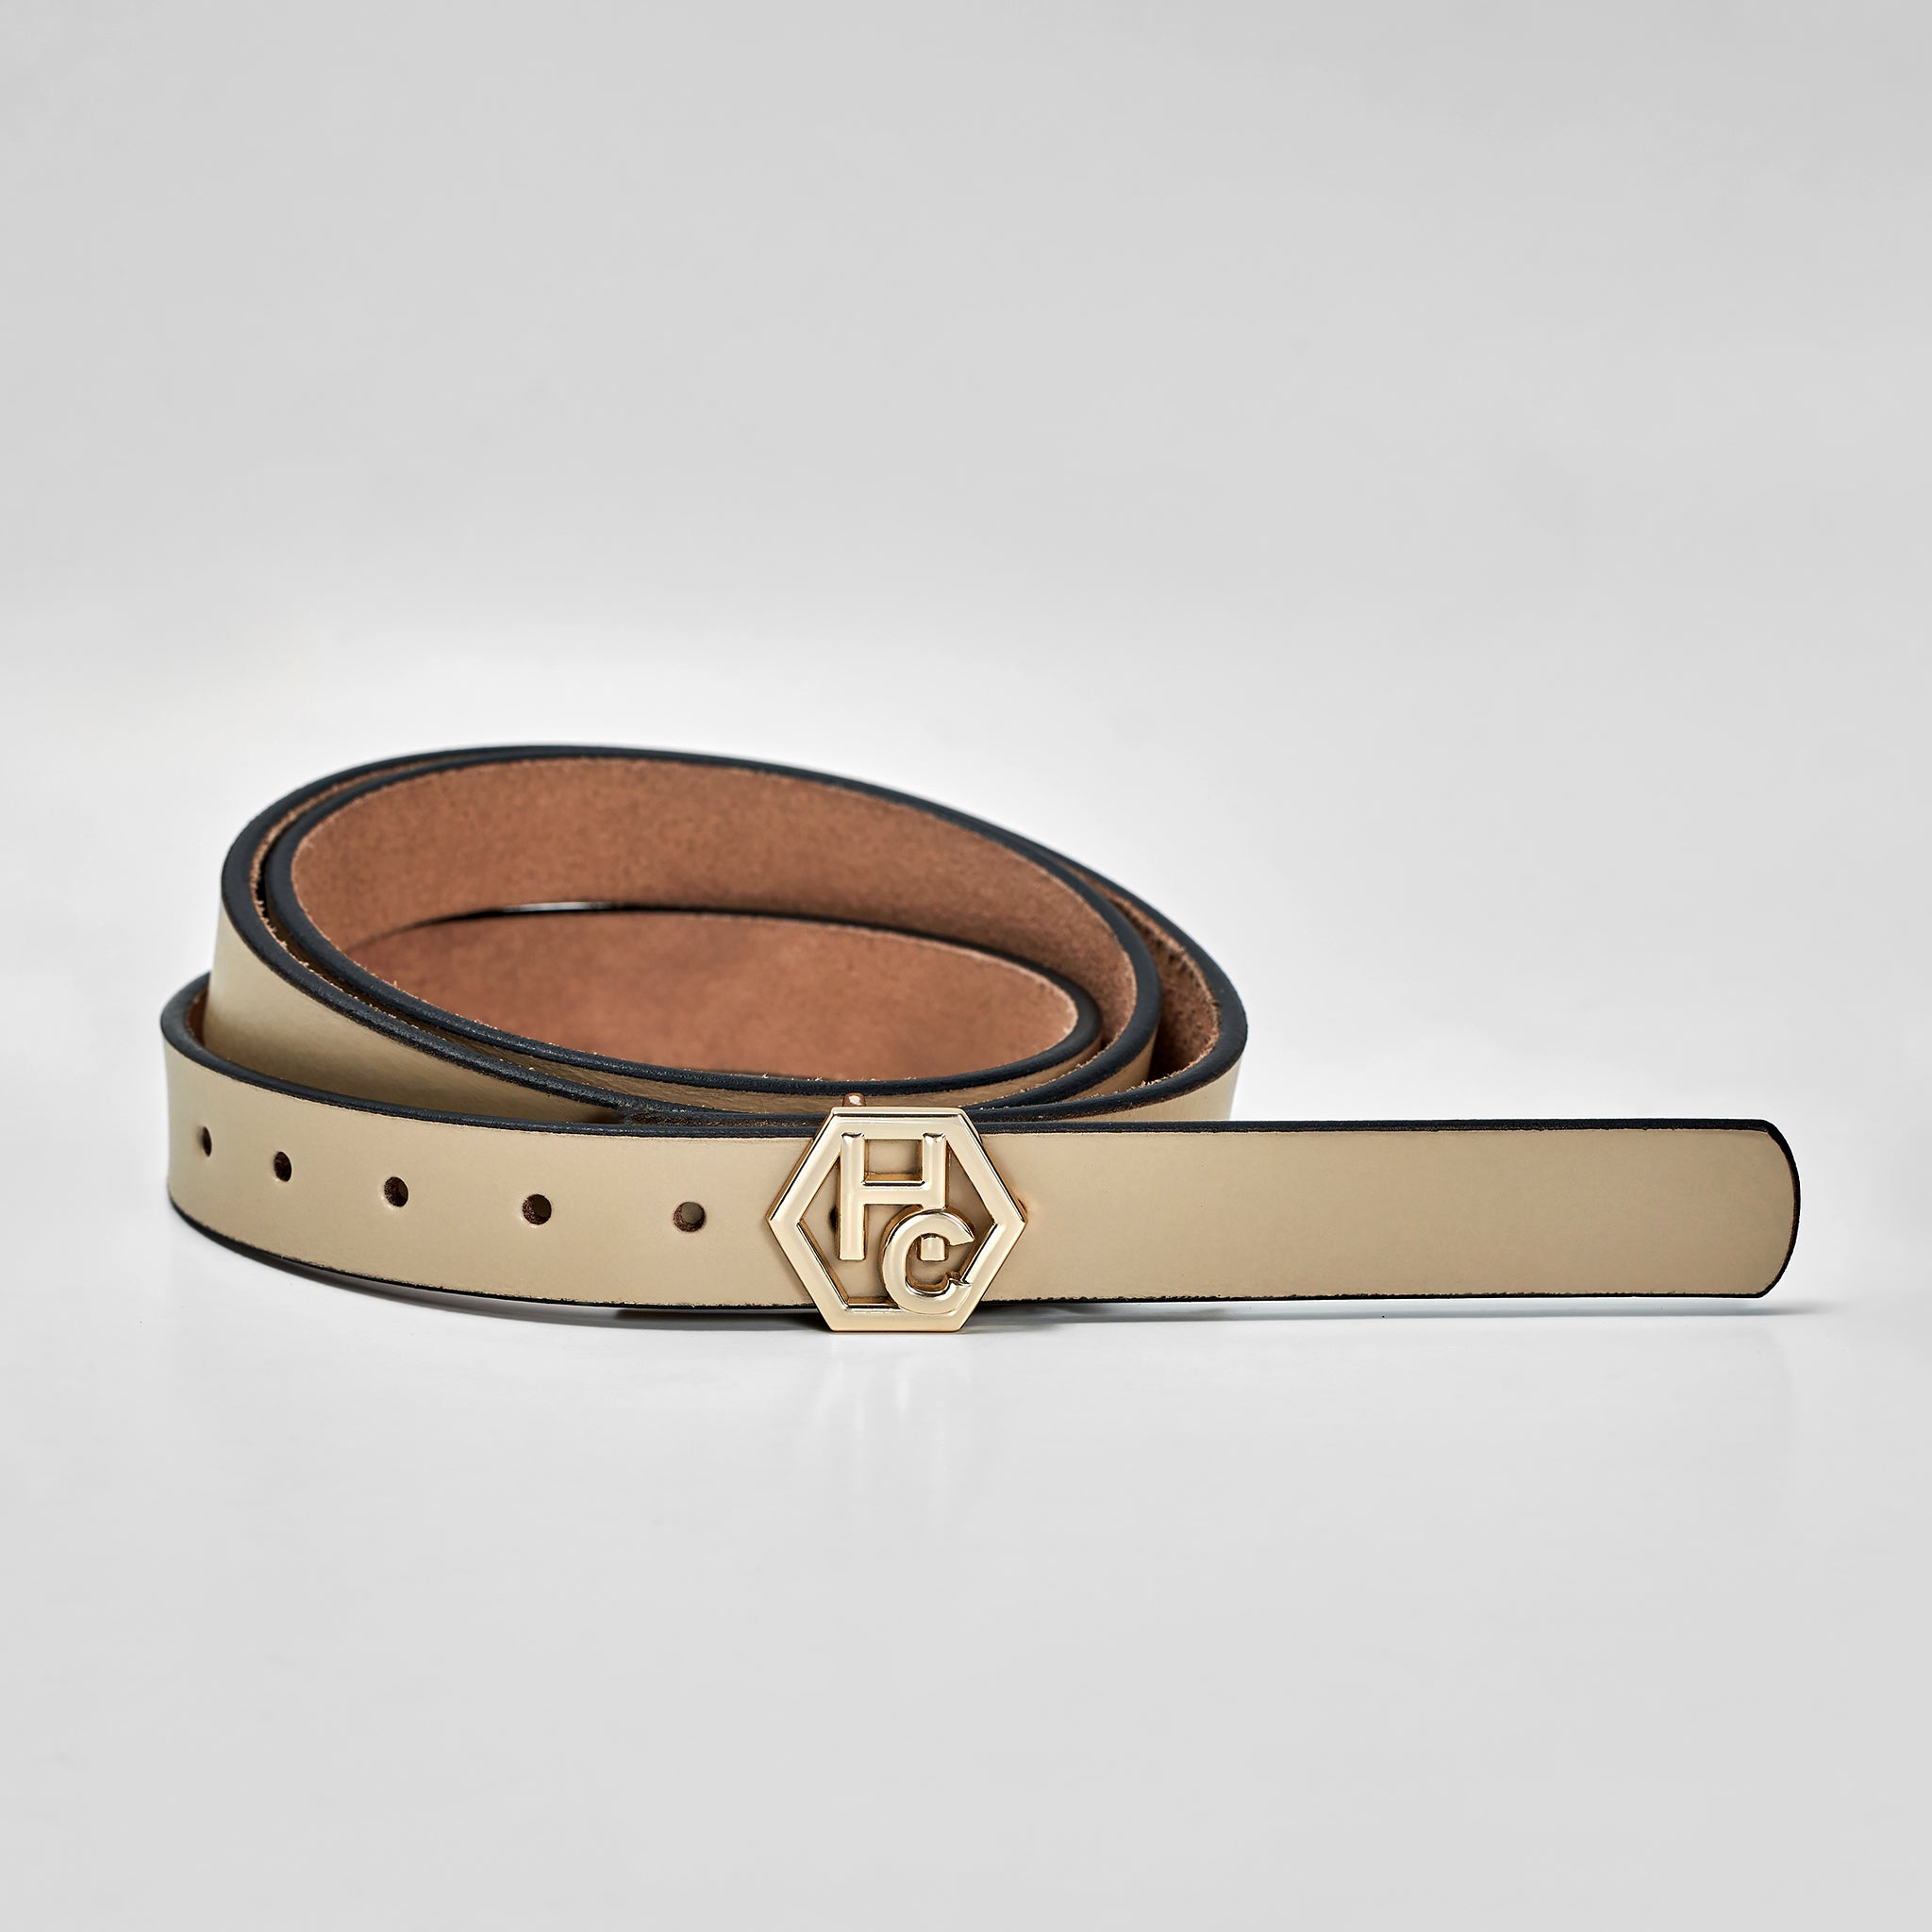 Hedonist Chicago Seamless Ivory Leather Belt 1" 32381373776023